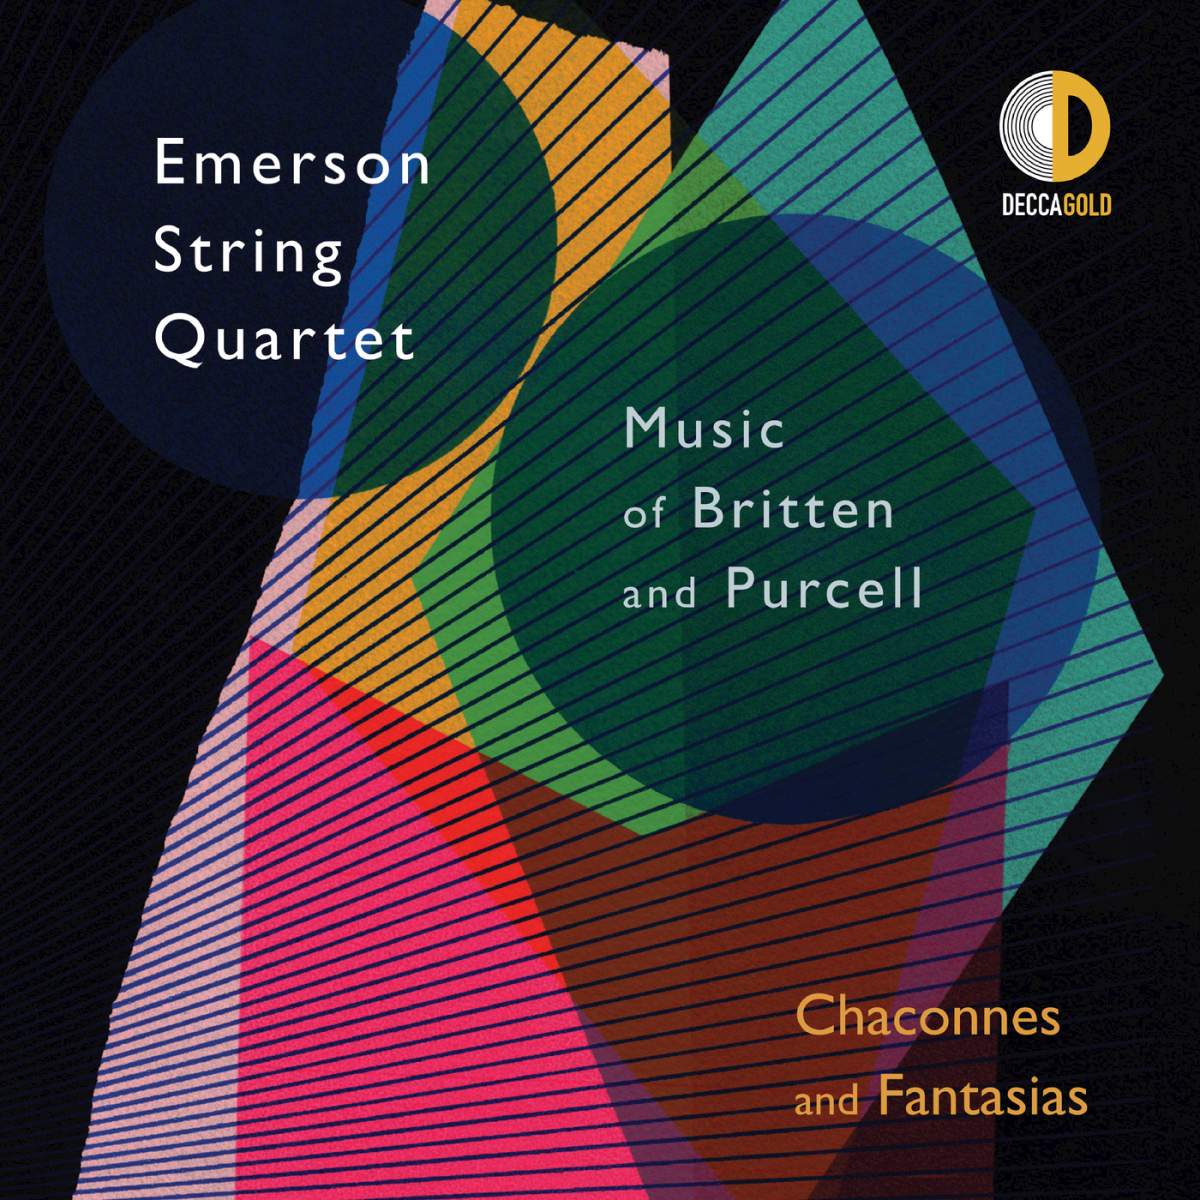 Emerson String Quartet - Chaconnes and Fantasias: Music of Britten and Purcell (2017) [Qobuz FLAC 24bit/44,1kHz]